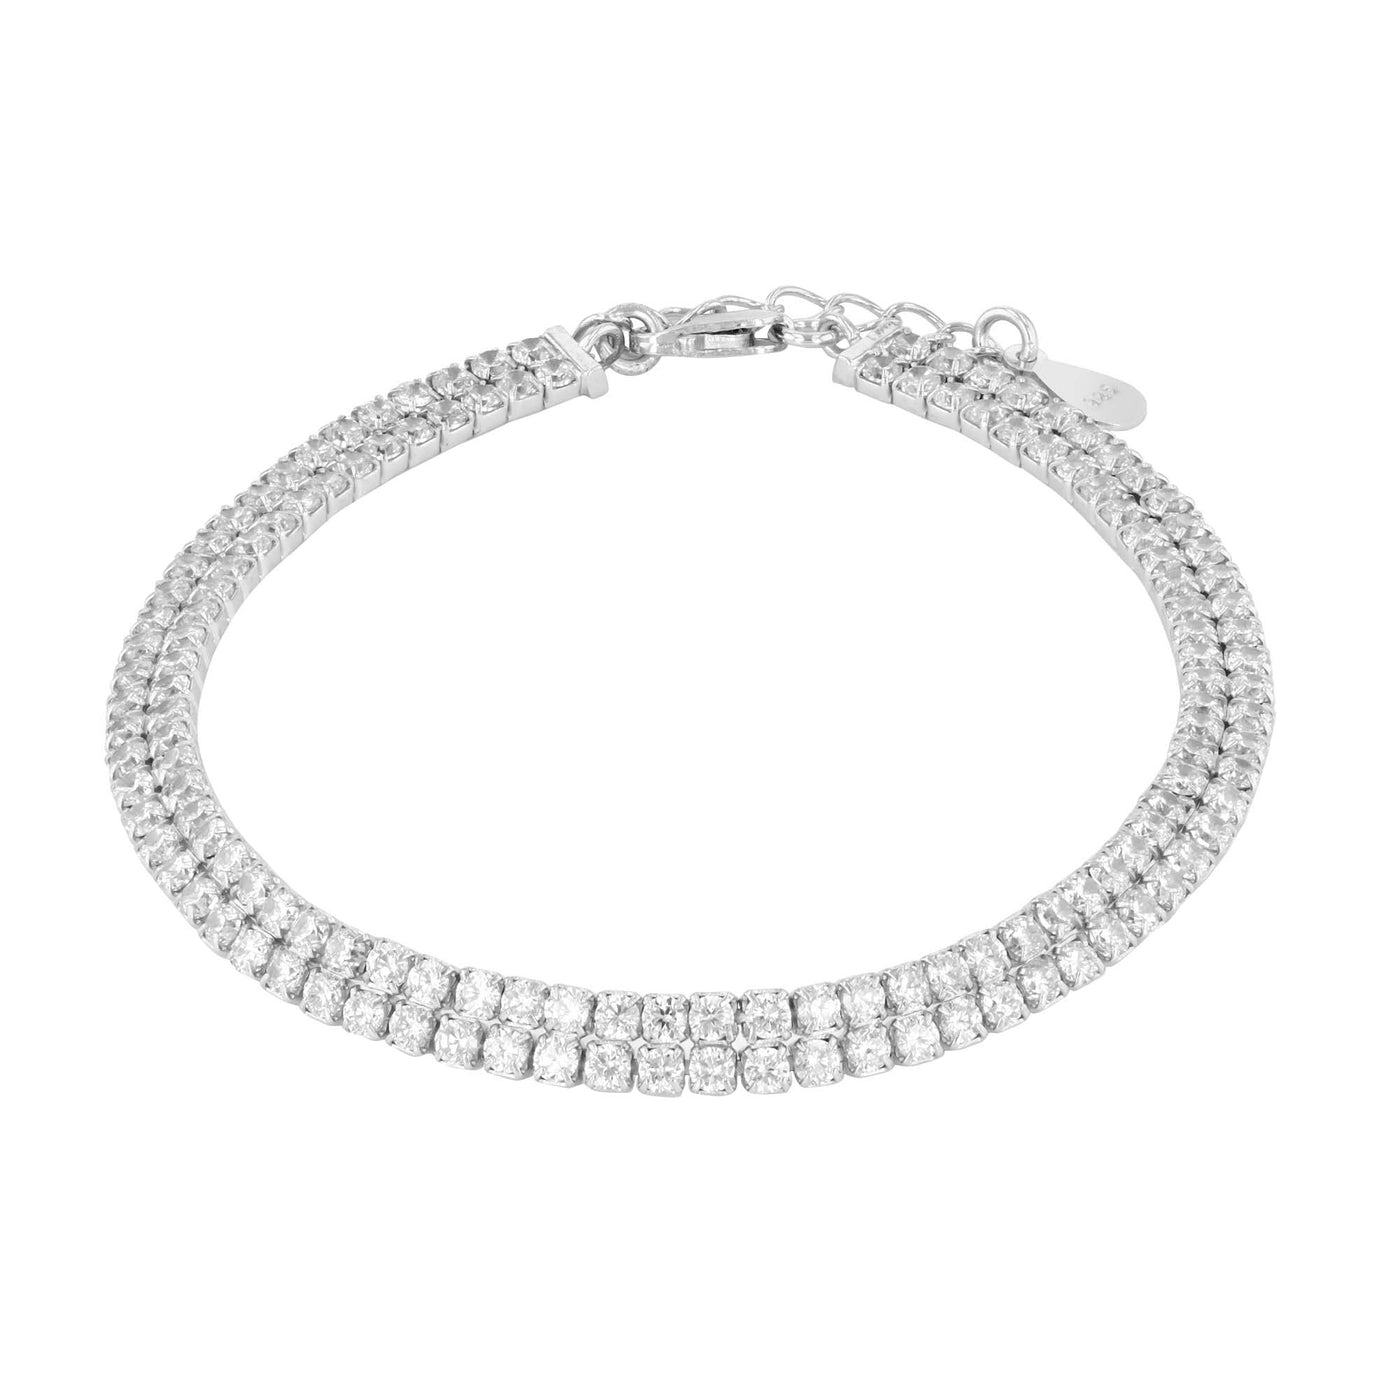 Rebecca Sloane Sterling Silver Double Row Bracelet With CZ